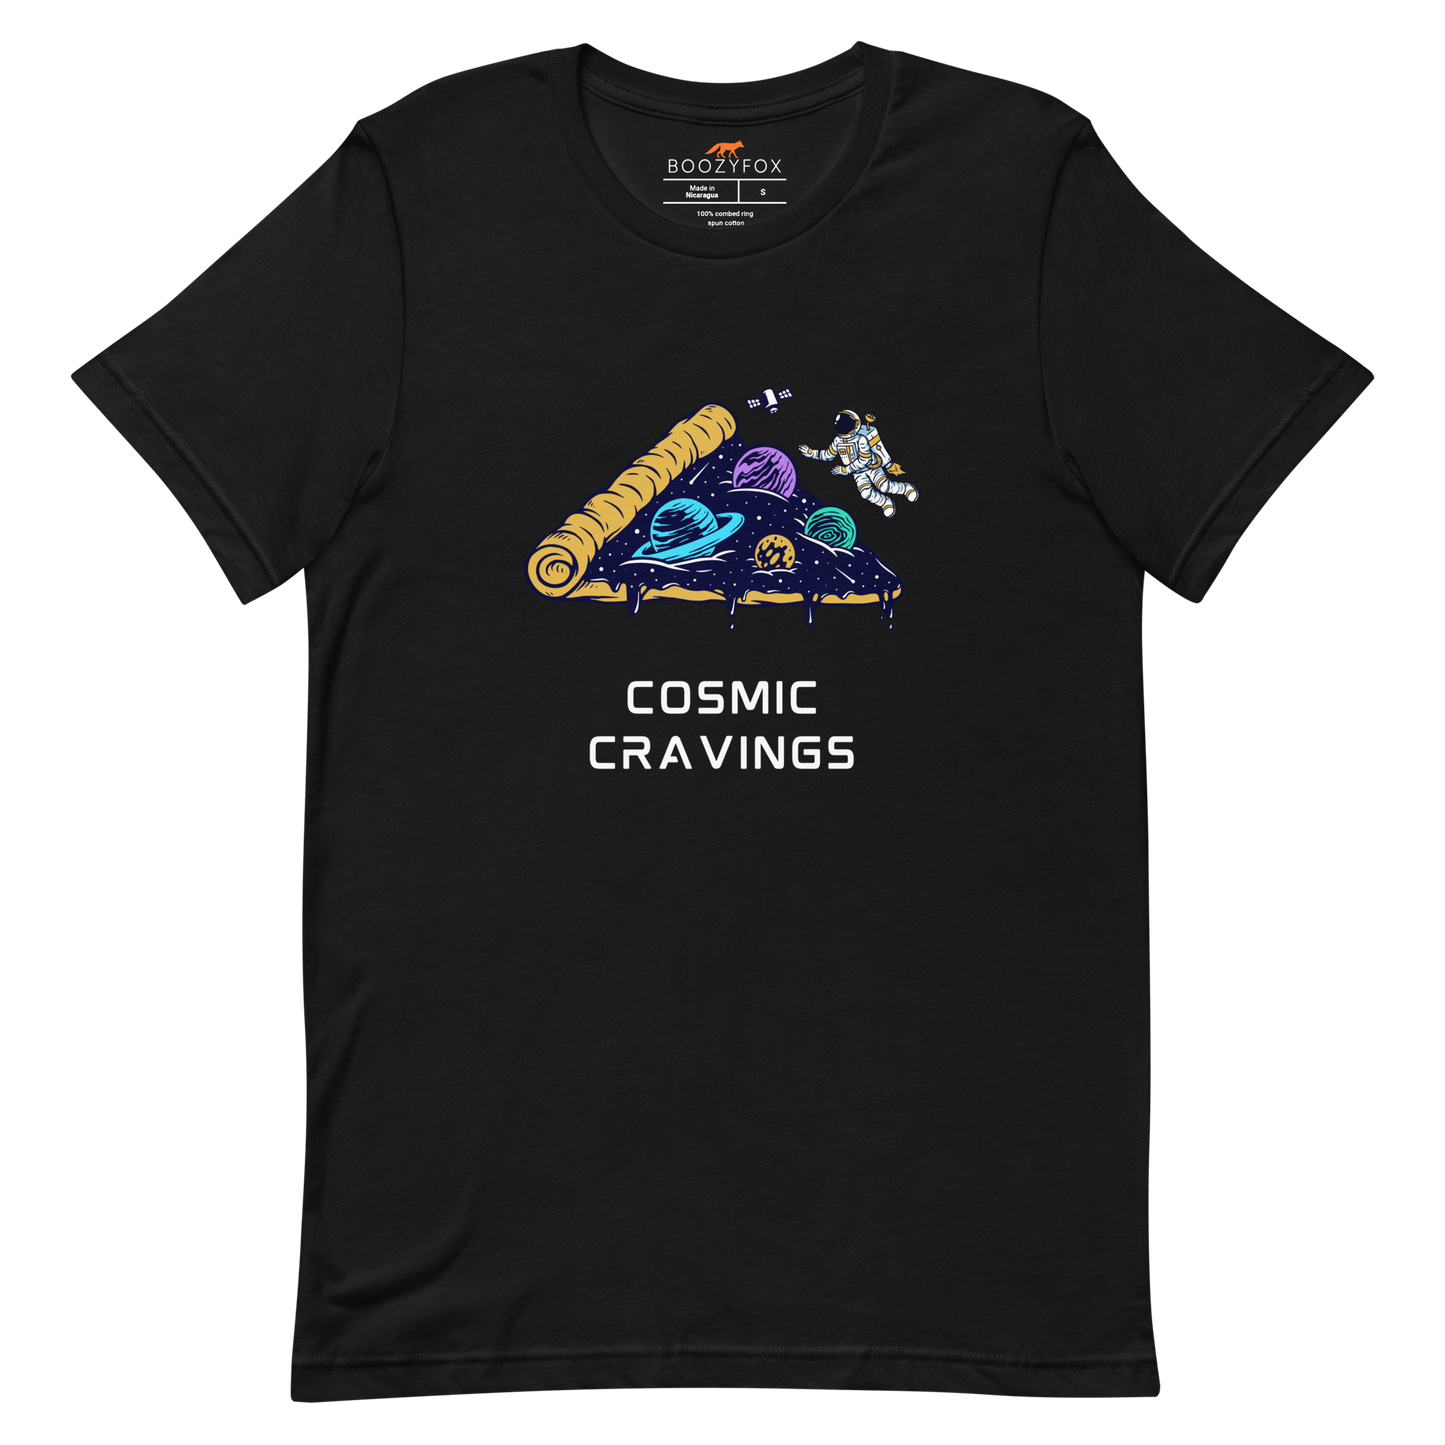 Black Premium Cosmic Cravings Tee featuring an Astronaut Exploring a Pizza Universe graphic on the chest - Funny Graphic Space Tees - Boozy Fox